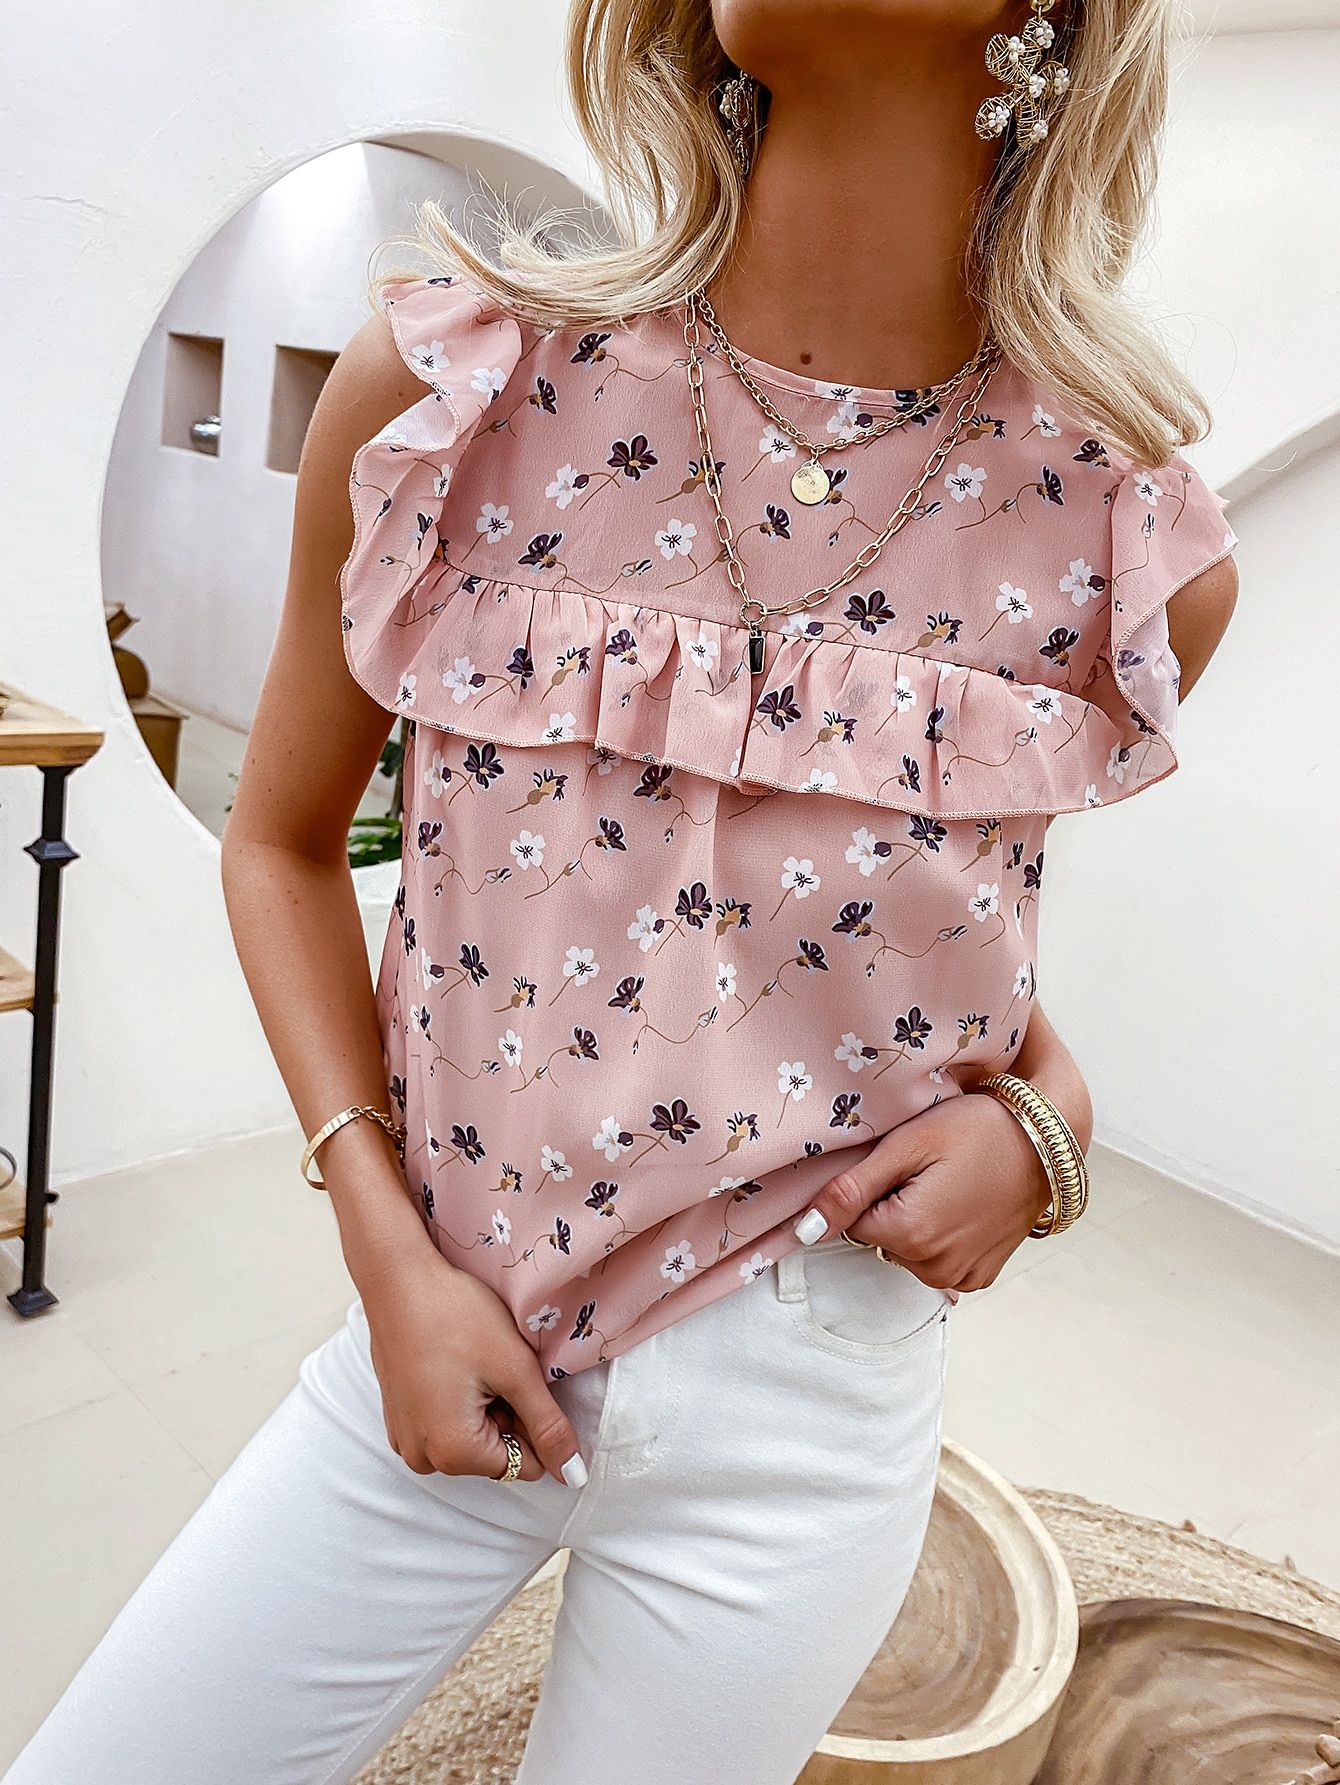 Simplee Ruffle Trim Keyhole Back Floral Top | SHEIN